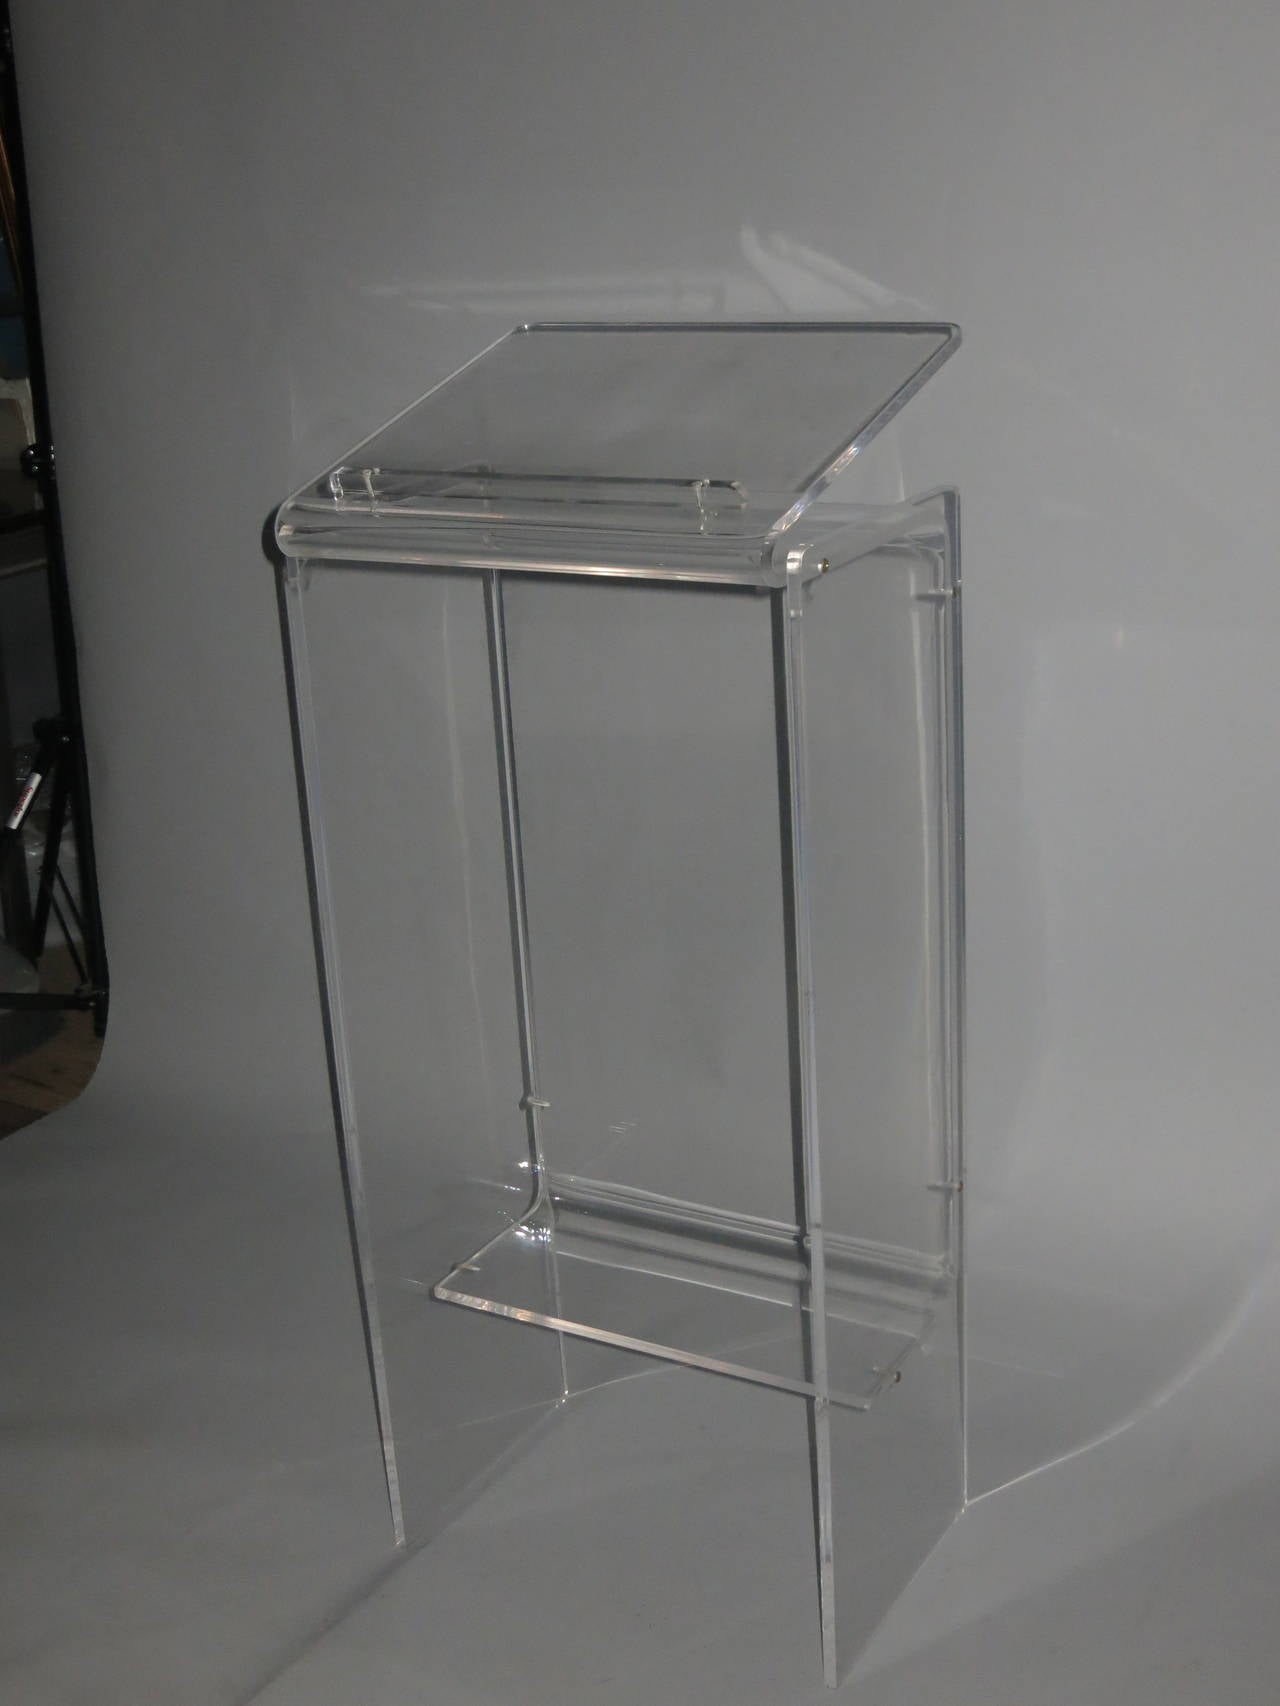 Well kept acrylic Podium is all Lucite bonded with counter sunk screws. The top angles up for reading material or book. Perfect for restaurant Reservations or Music stand. The condition is amazing practically without a scratch

Made in USA